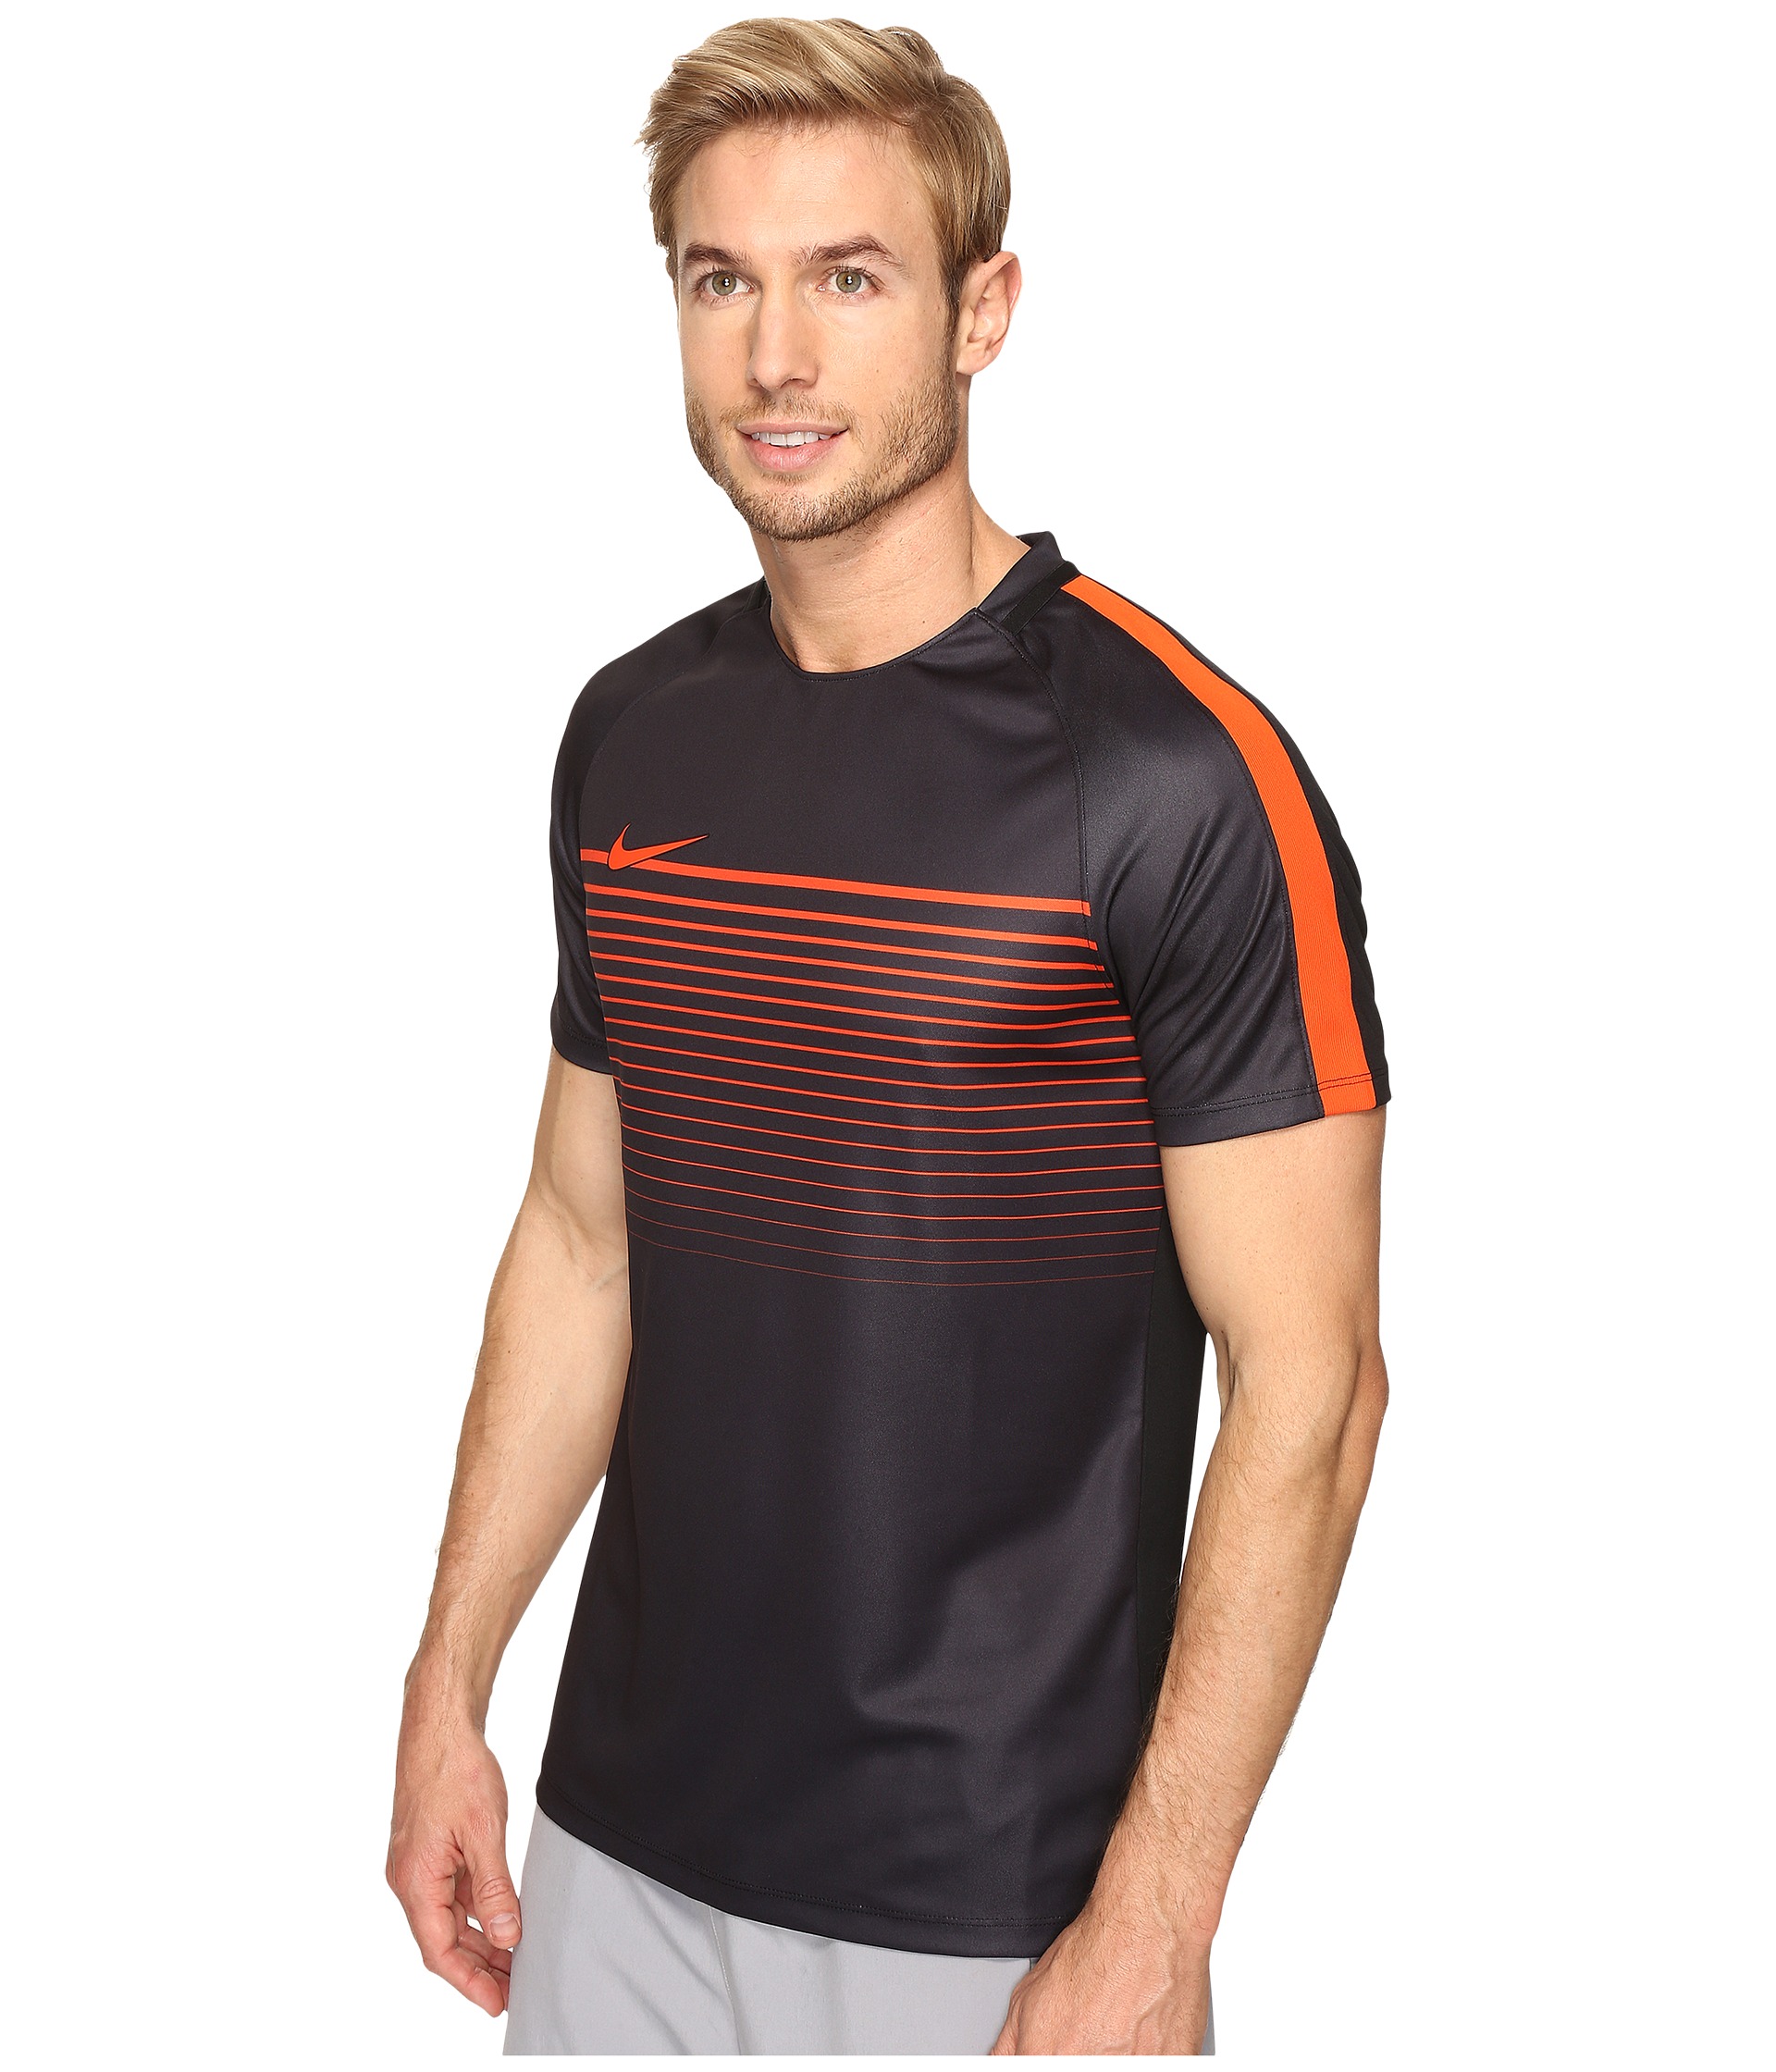 Nike Dry Squad Short Sleeve Soccer Top at Zappos.com